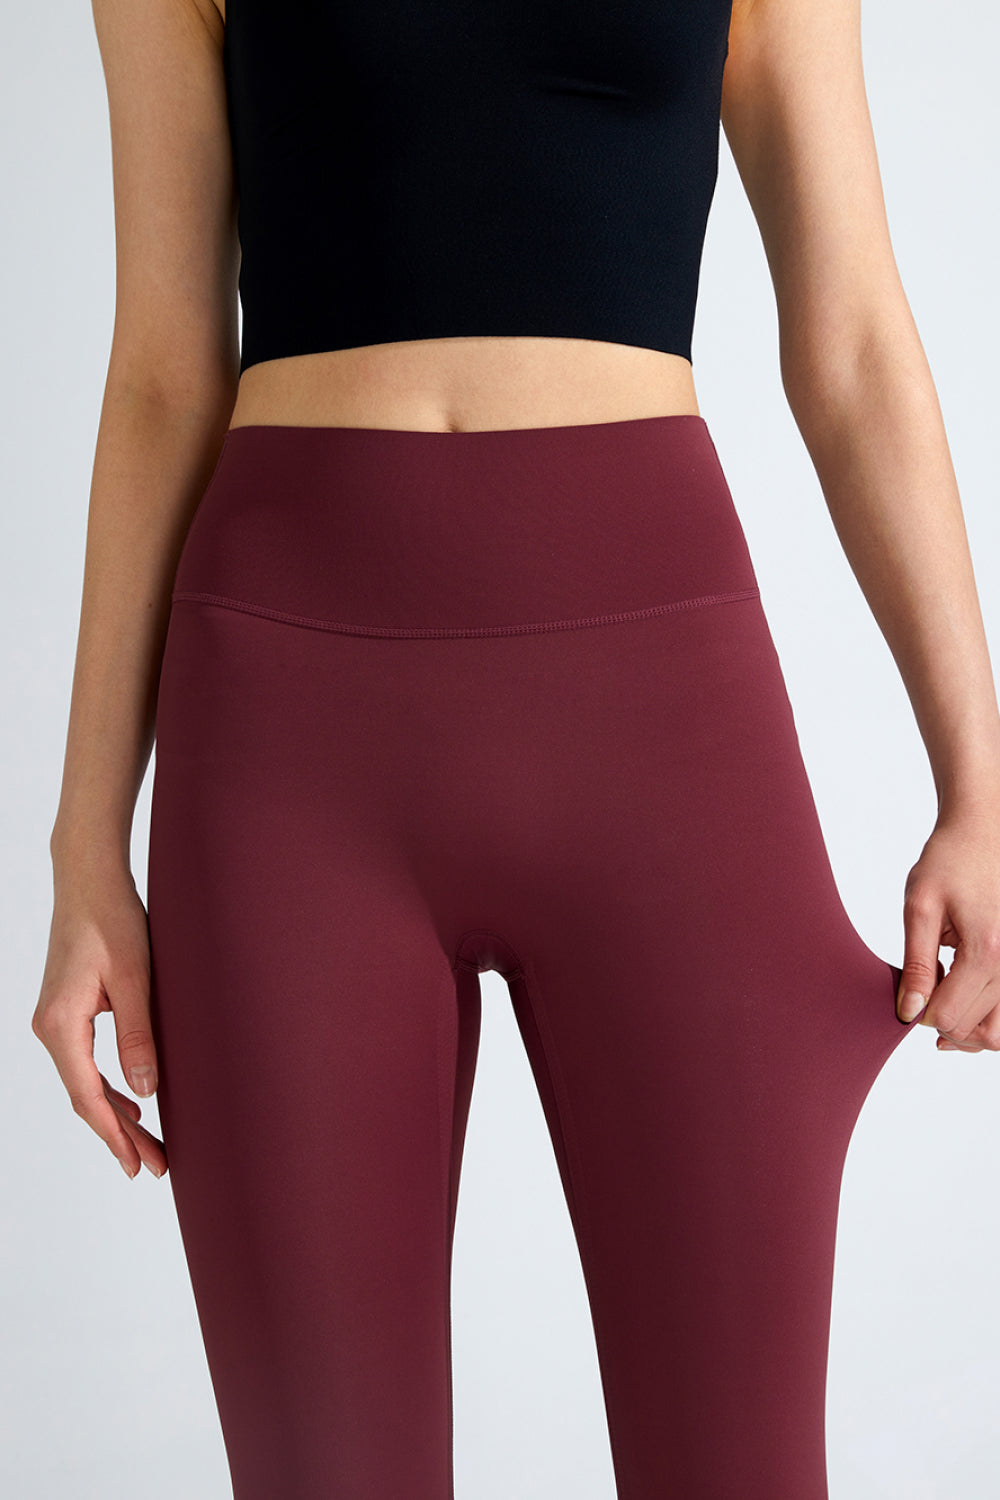 High Waist Breathable Sports Leggings - Women’s Clothing & Accessories - Pants - 6 - 2024